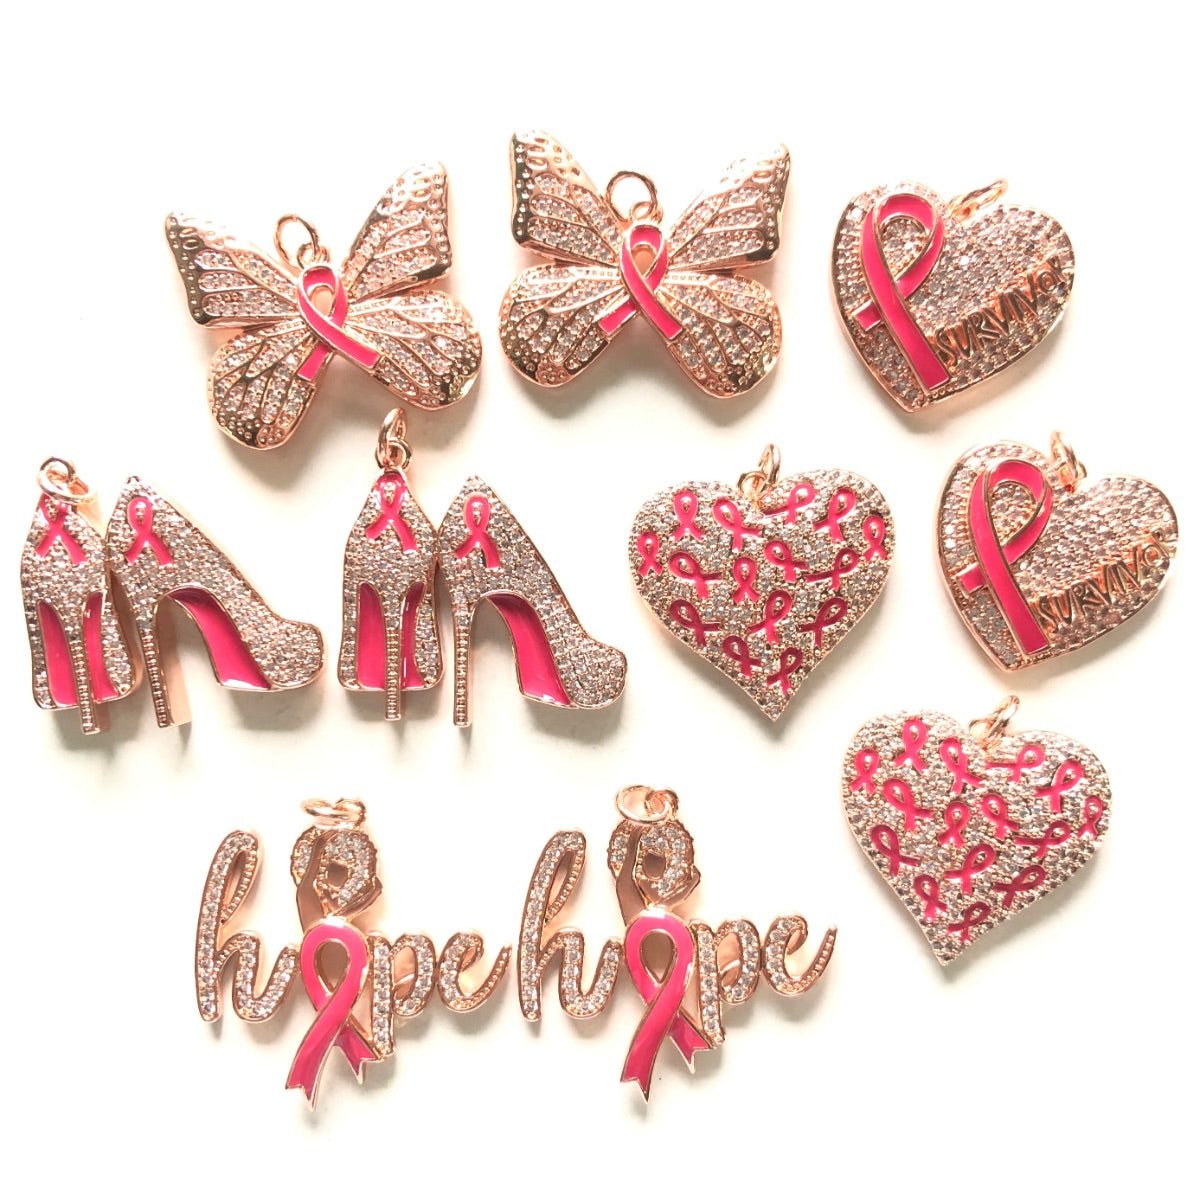 10pcs/lot CZ Pave Pink Ribbon Heart High Heel Butterfly Hope Word Breast Cancer Awareness Charms Bundle Rose Gold Set CZ Paved Charms Breast Cancer Awareness Mix Charms New Charms Arrivals Charms Beads Beyond